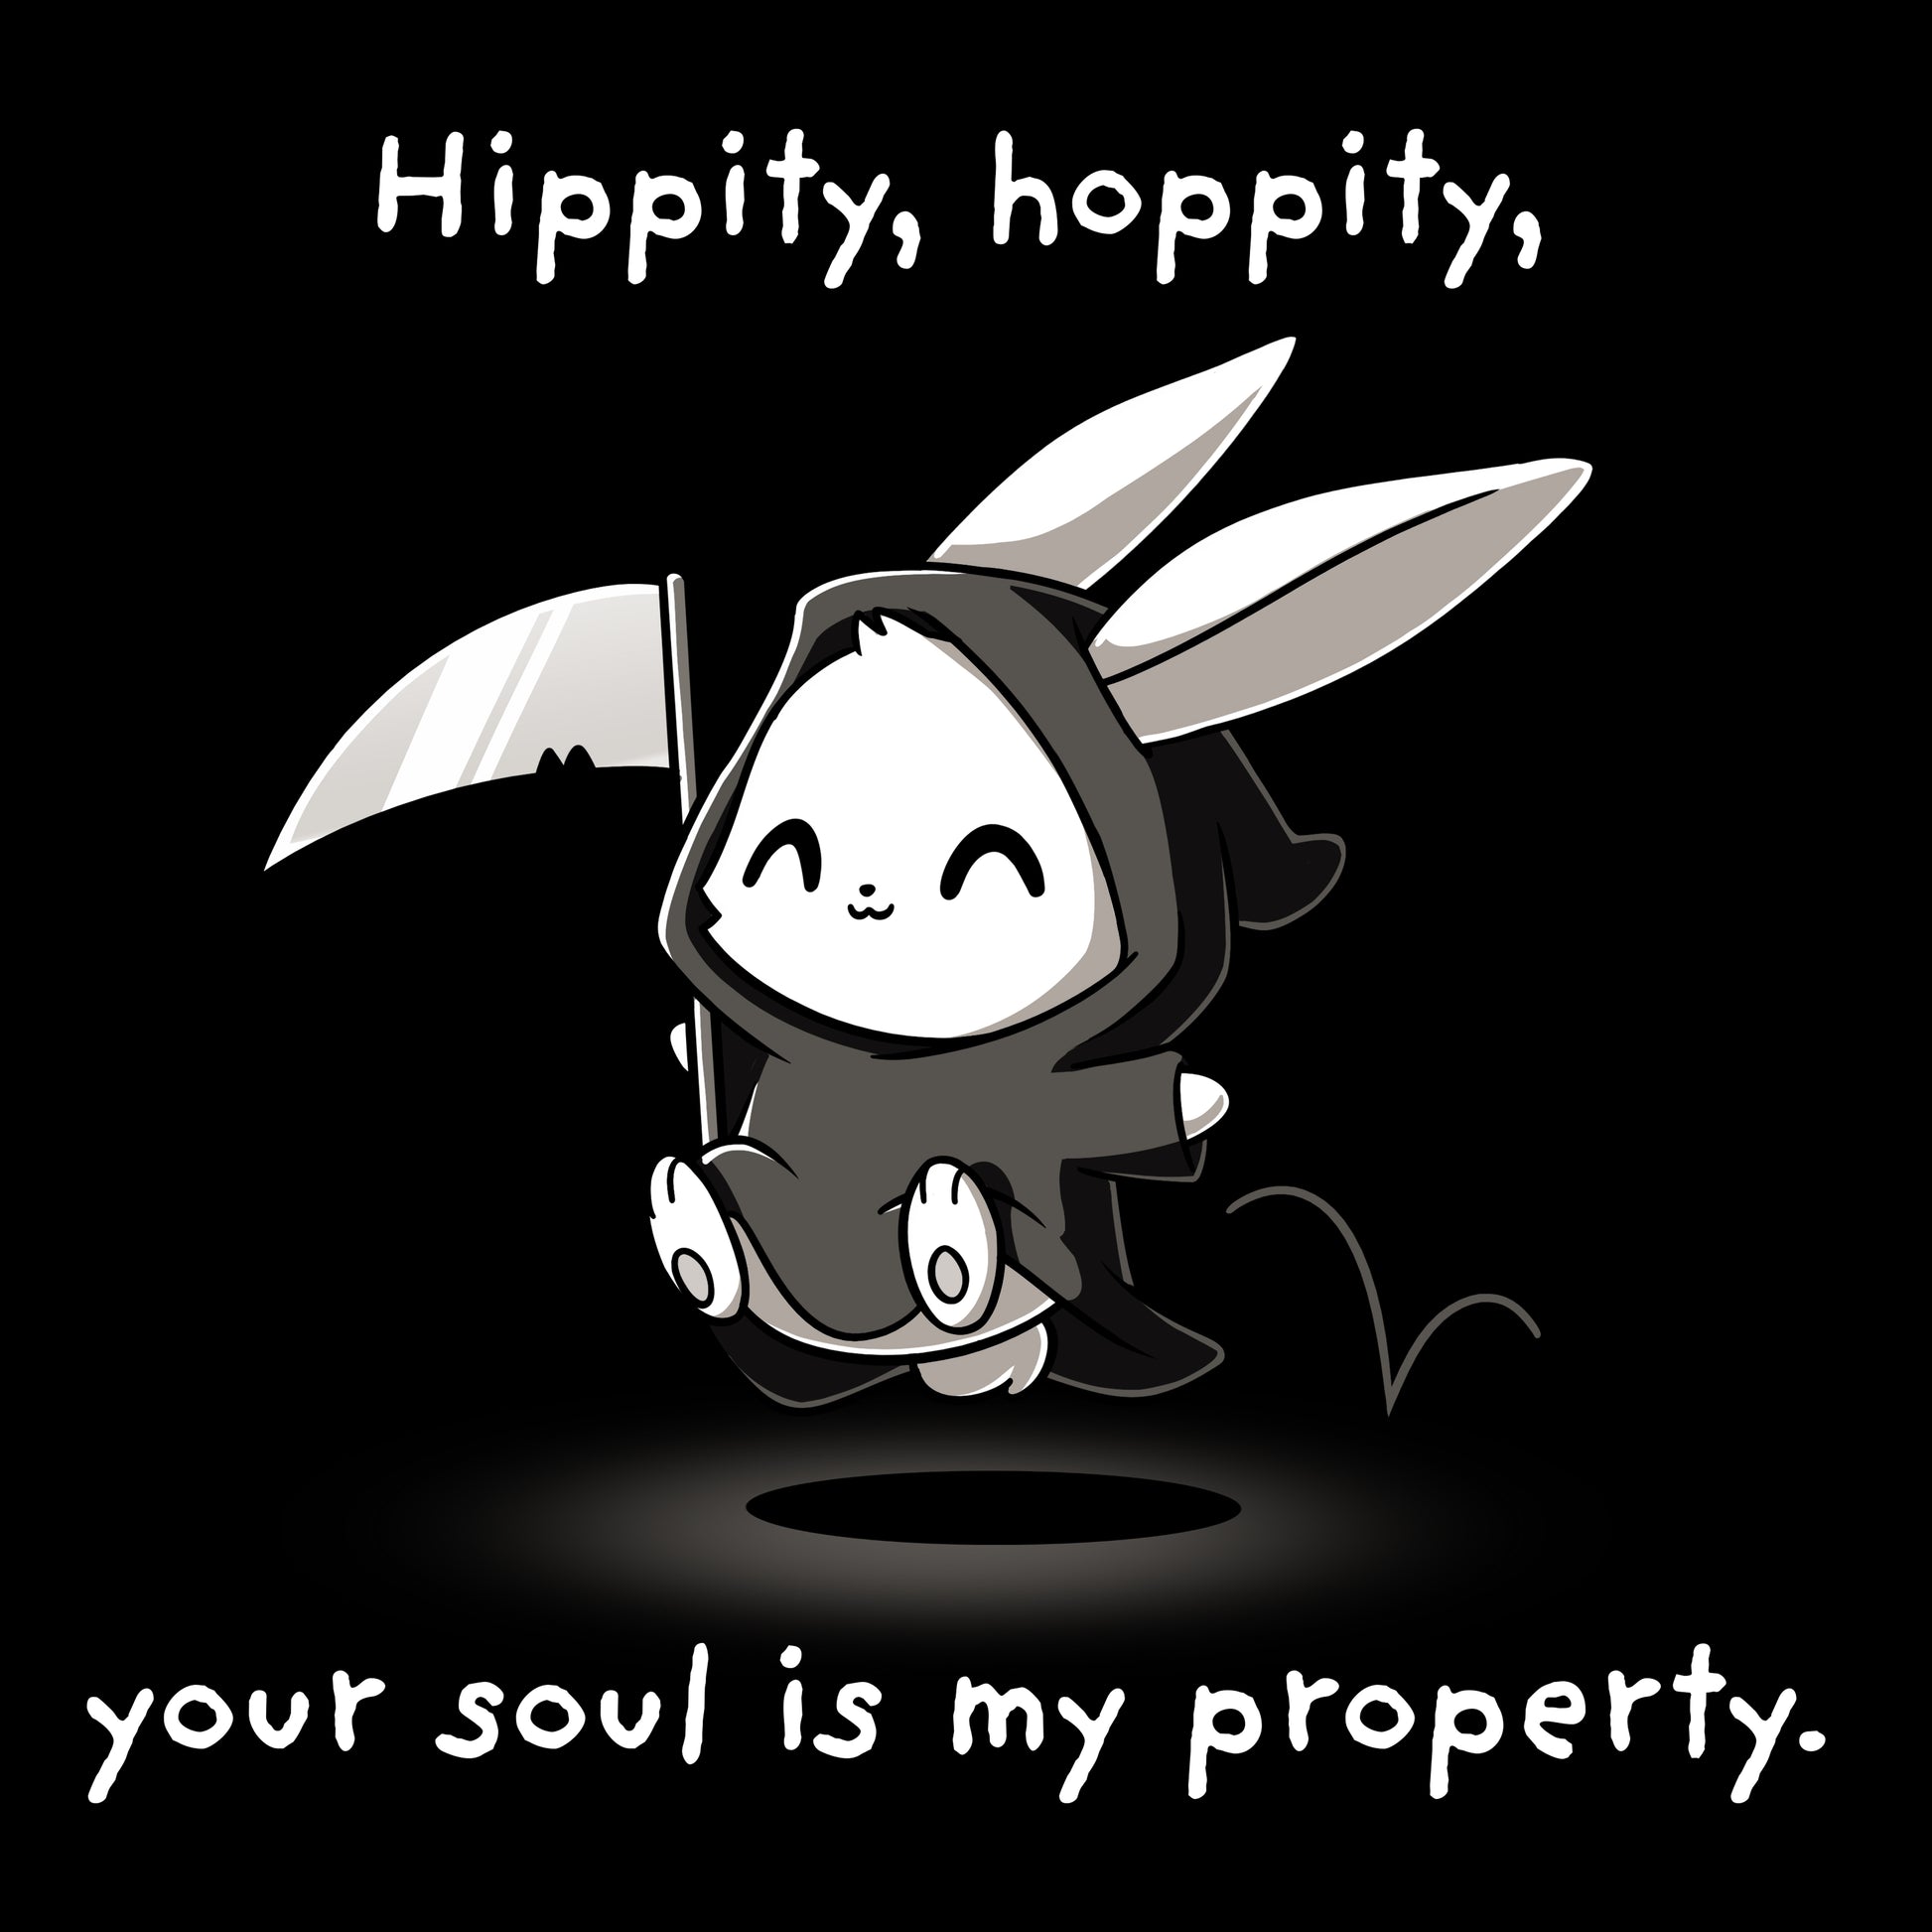 TeeTurtle's Hippity Hoppity Your Soul is My Property (Glow) design ensures a looser fit that will make your soul its property.